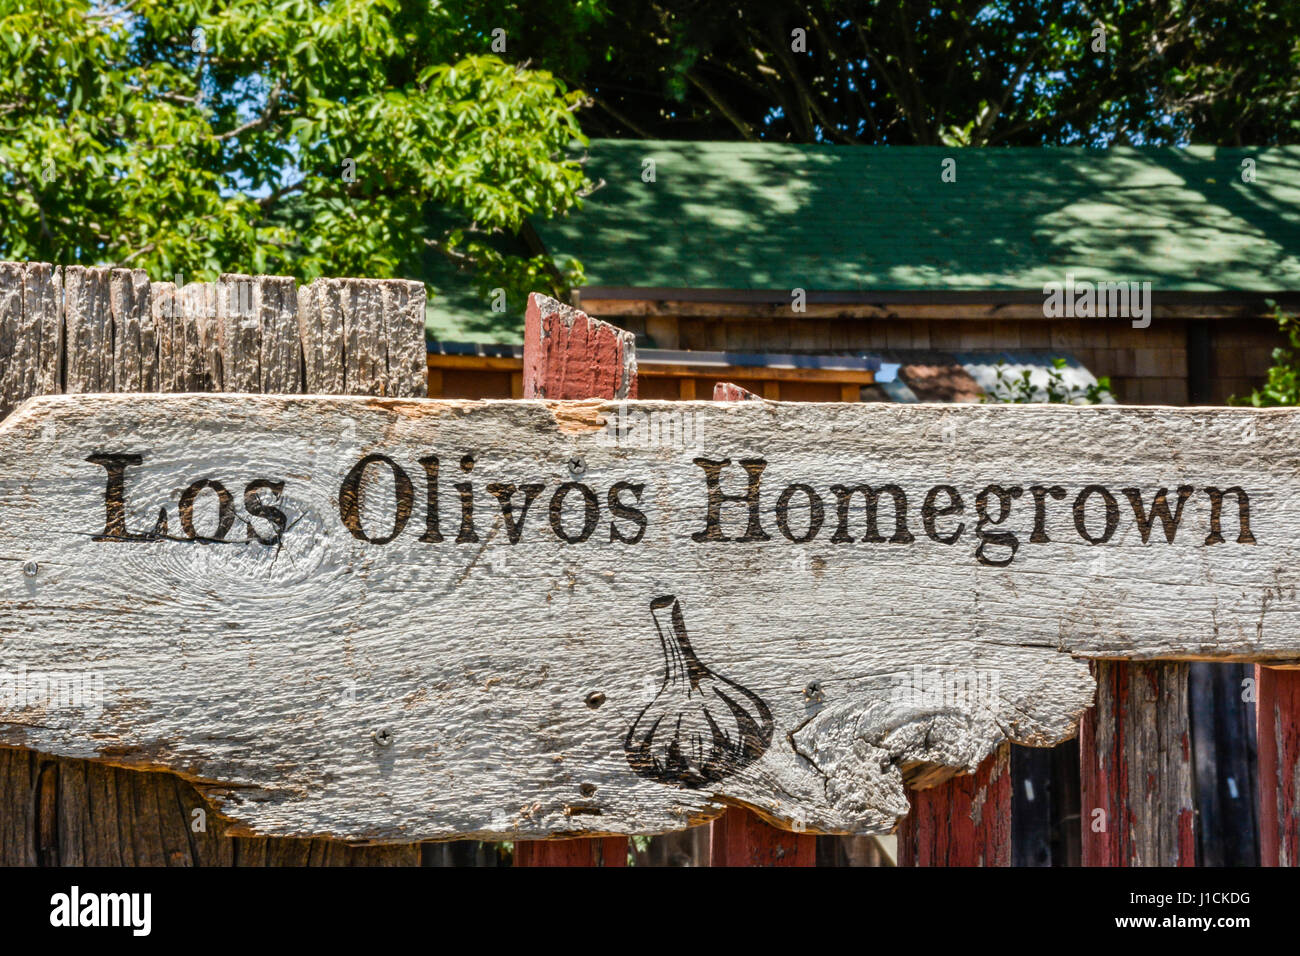 A handmade wooden sign at a roadside stand 'Los Olivos Homegrown' belongs to the famous Garlic Man of Los Olivos, California, a local favorite vendor Stock Photo